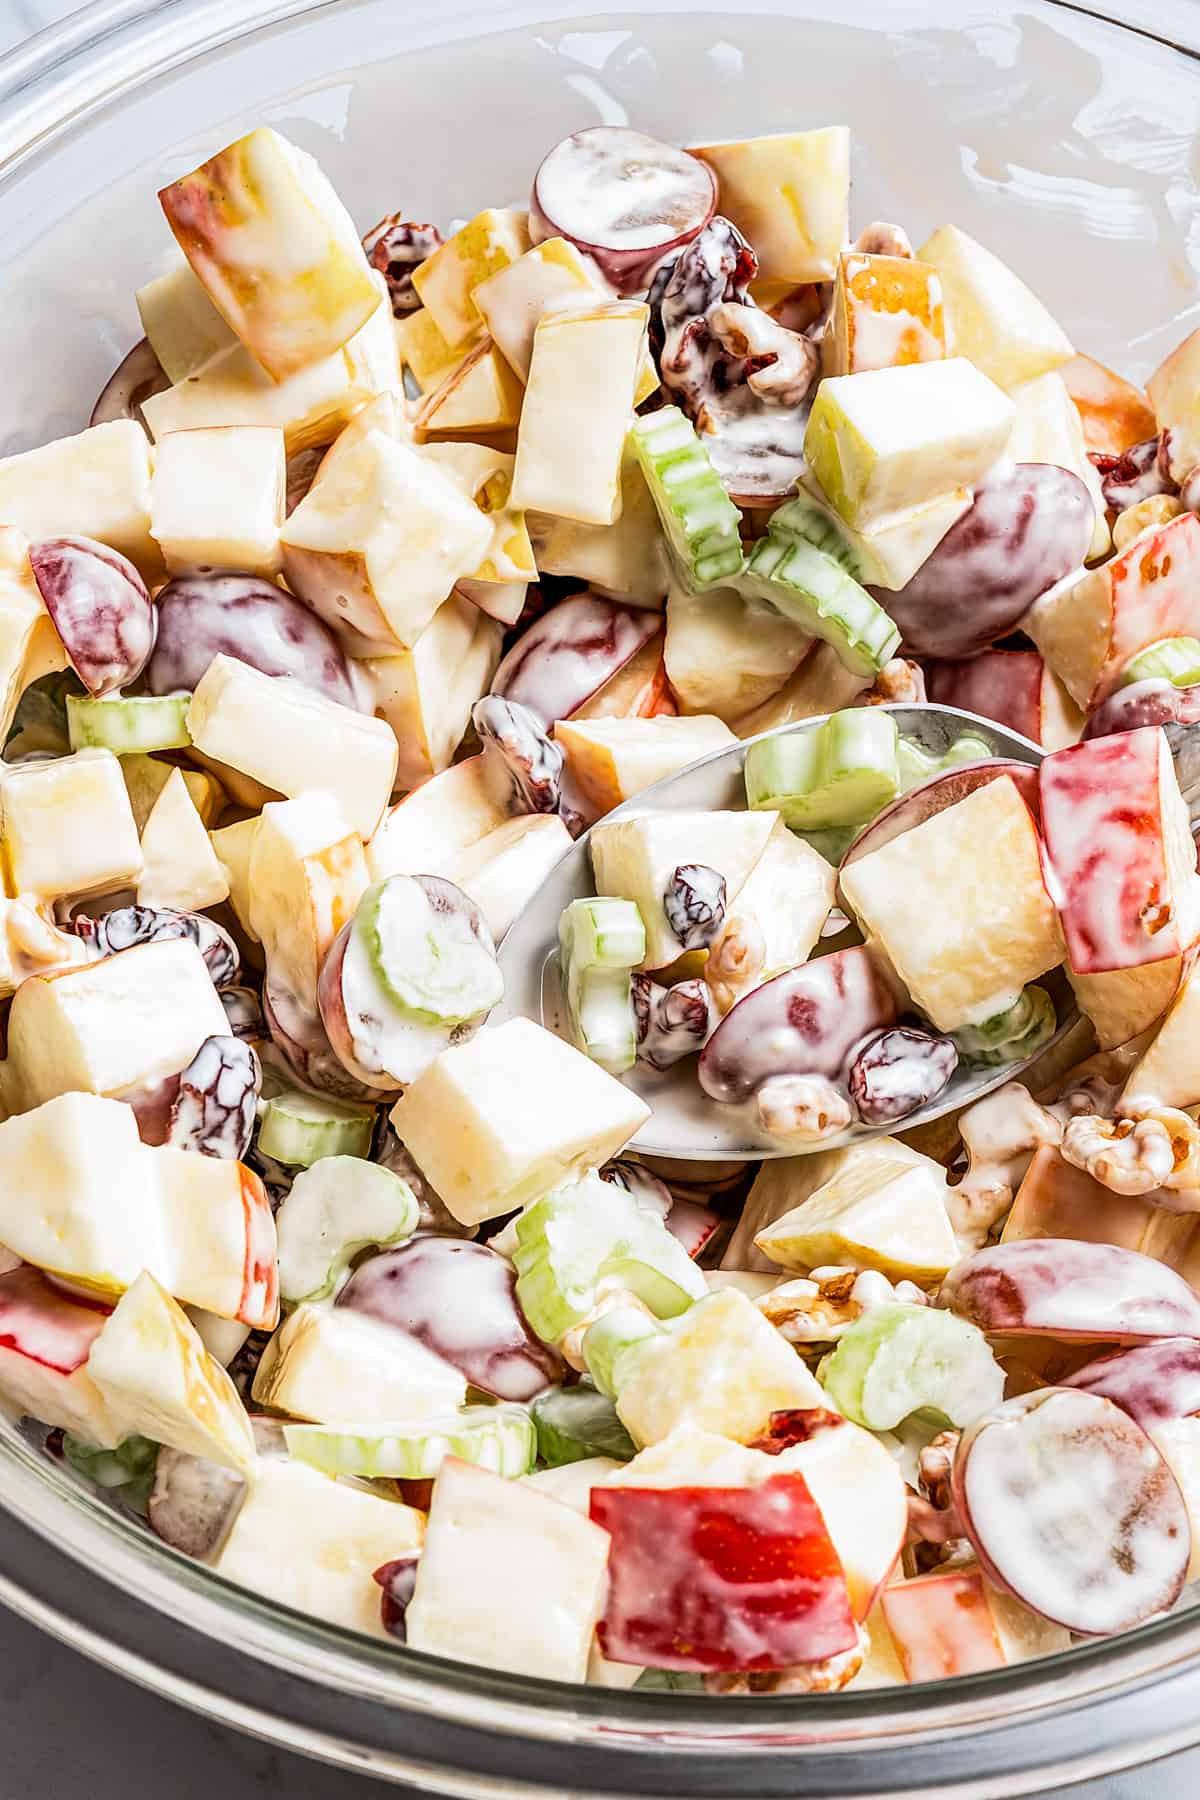 A traditional Christmas fruit salad with creamy mayonnaise dressing.